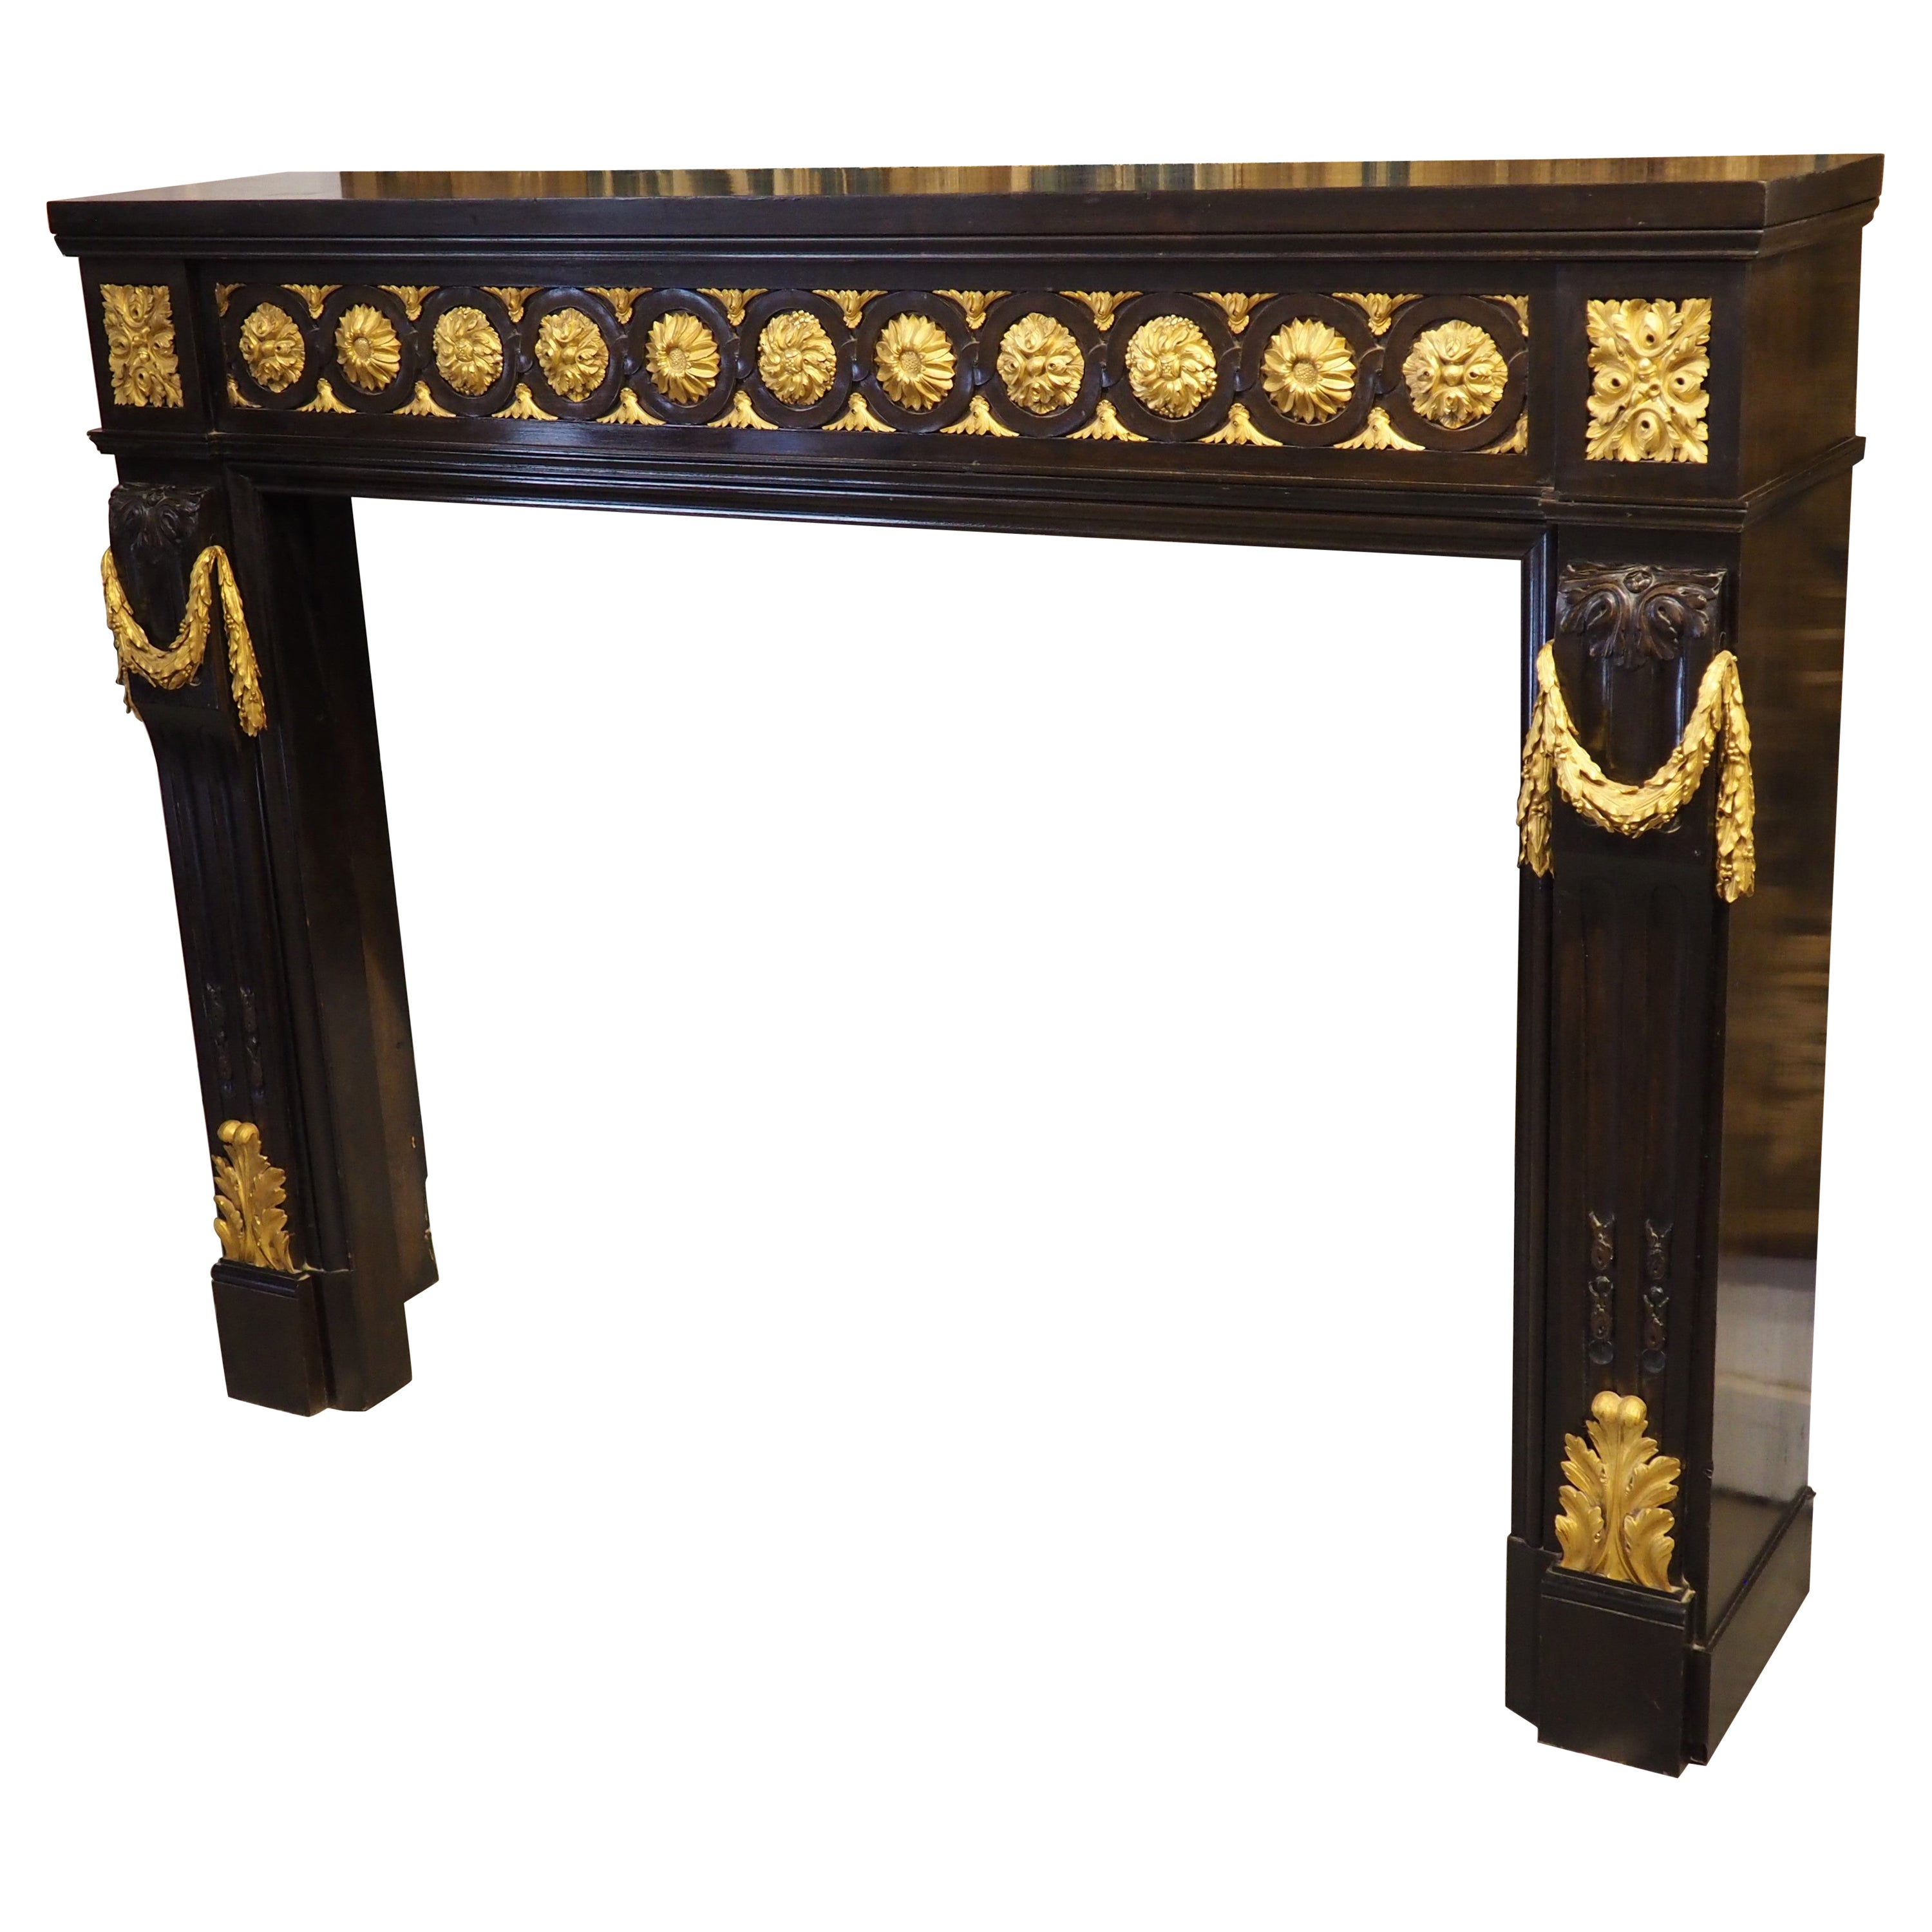 French Louis XVI Style Ebonized Wooden Mantel with Gilt Bronze Mounts, 20th C. For Sale